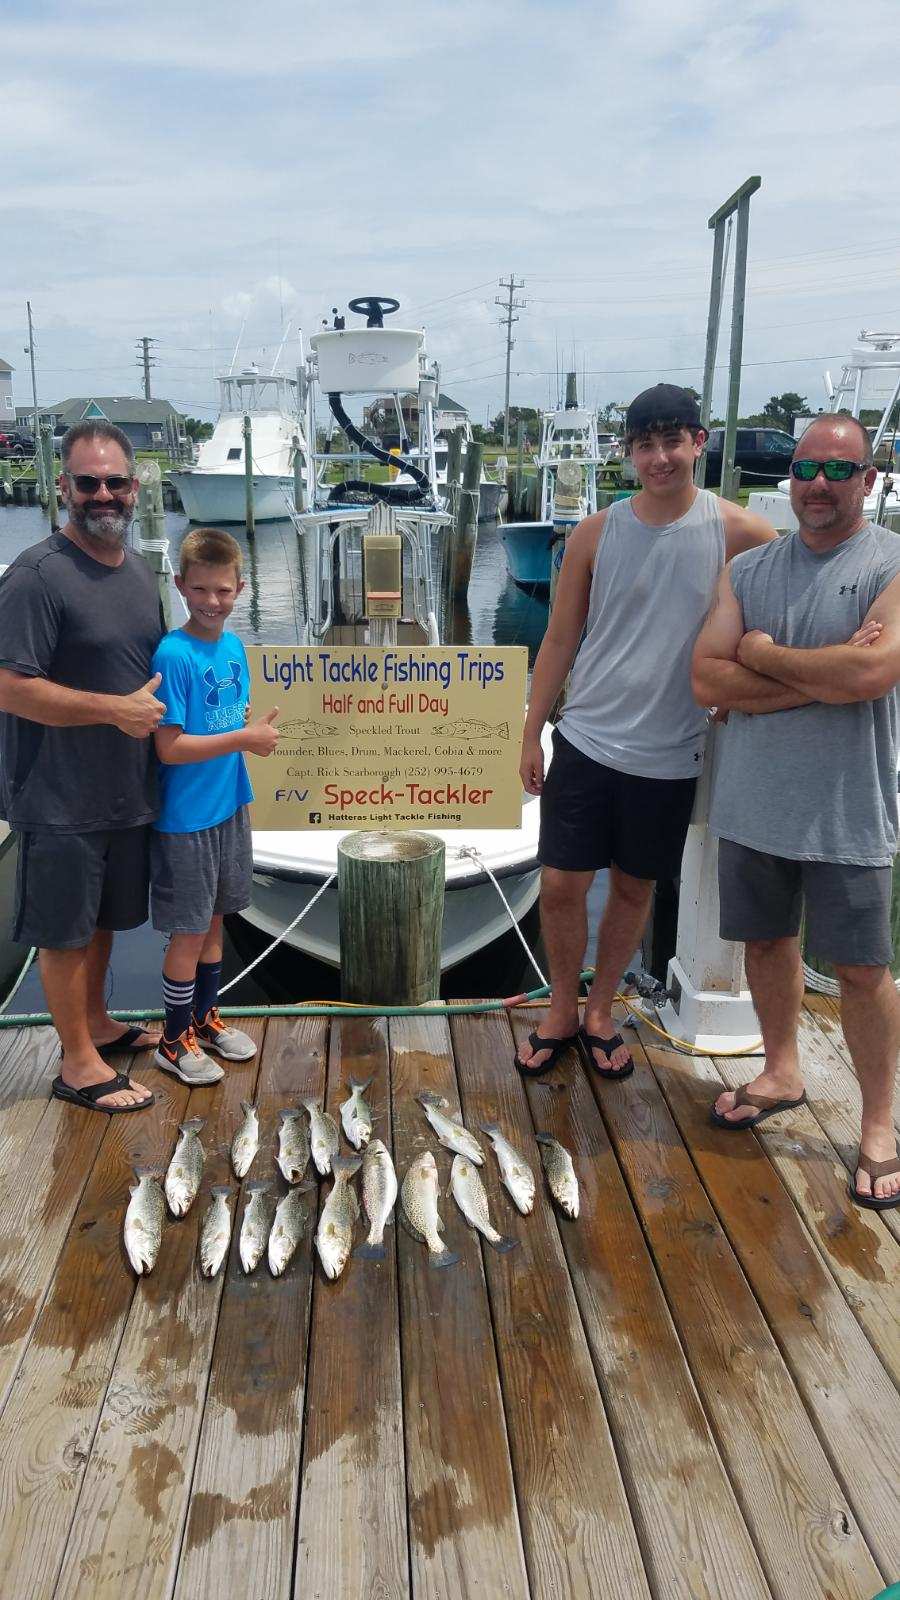 Speck-Tackler Teach's Lair Inshore Fishing Charters